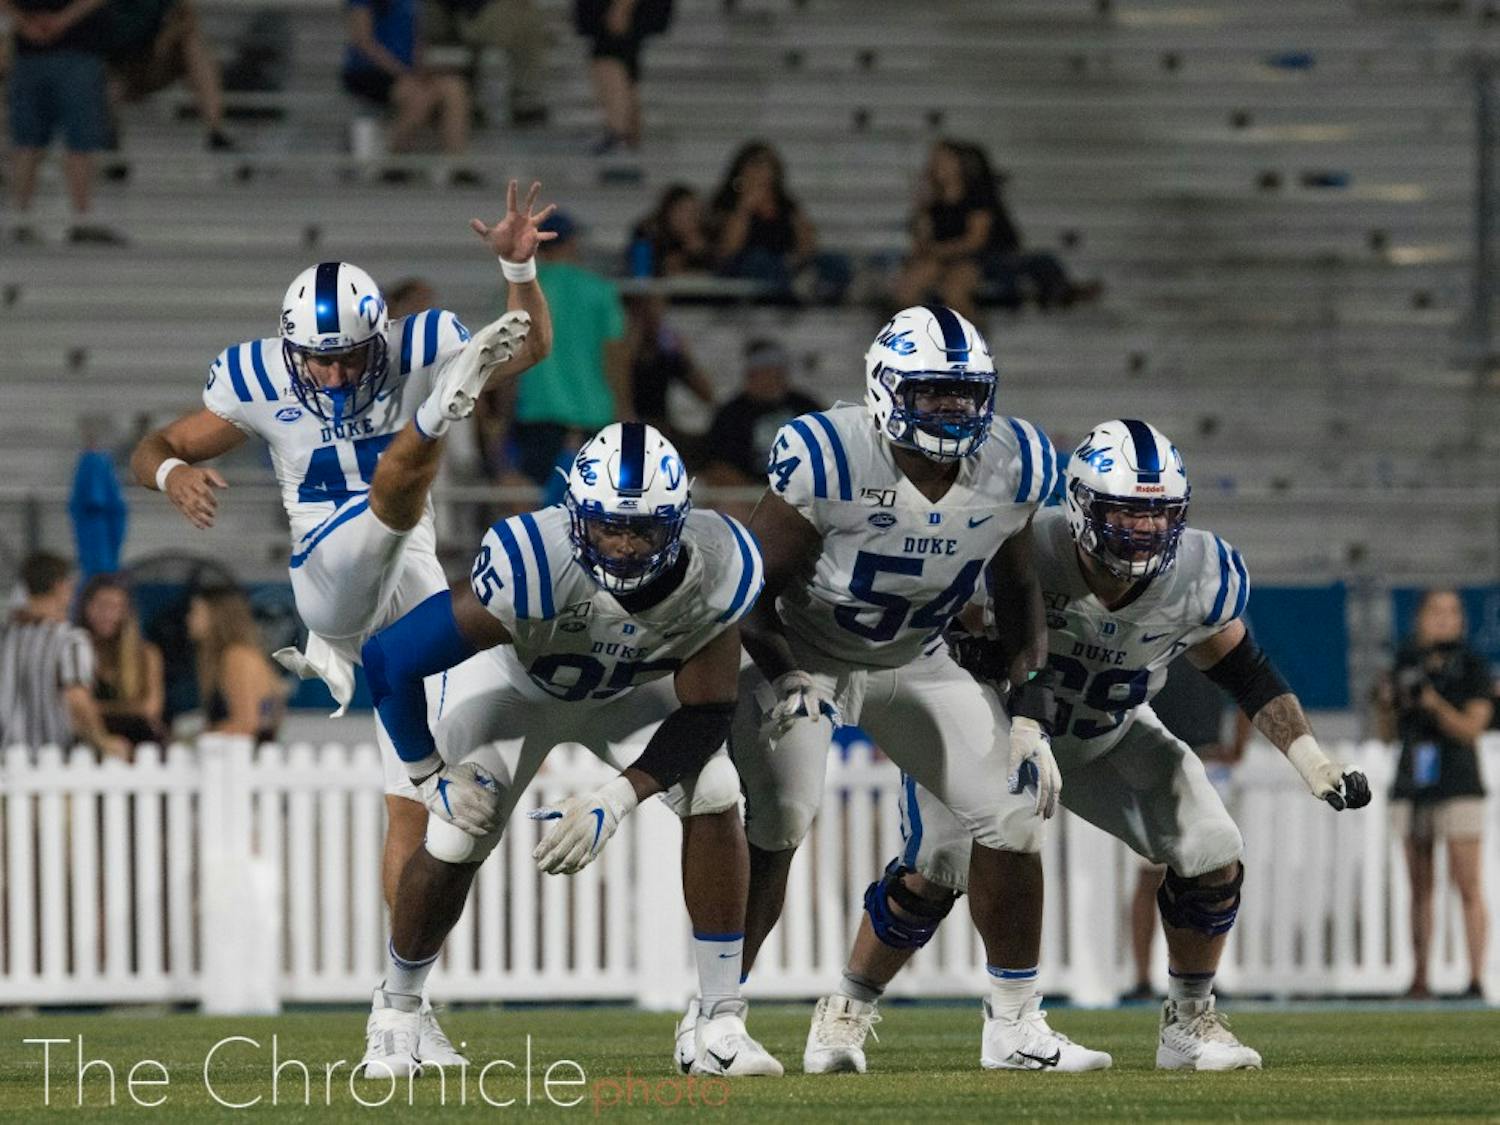 The Blue Devils carried off a 41-18 win against Middle Tennessee State University's Blue Raiders Saturday night at Johnny “Red” Floyd Stadium. Here are Photo Editor Mary Helen Wood's best shots from the game in Murfreesboro, Tennessee.